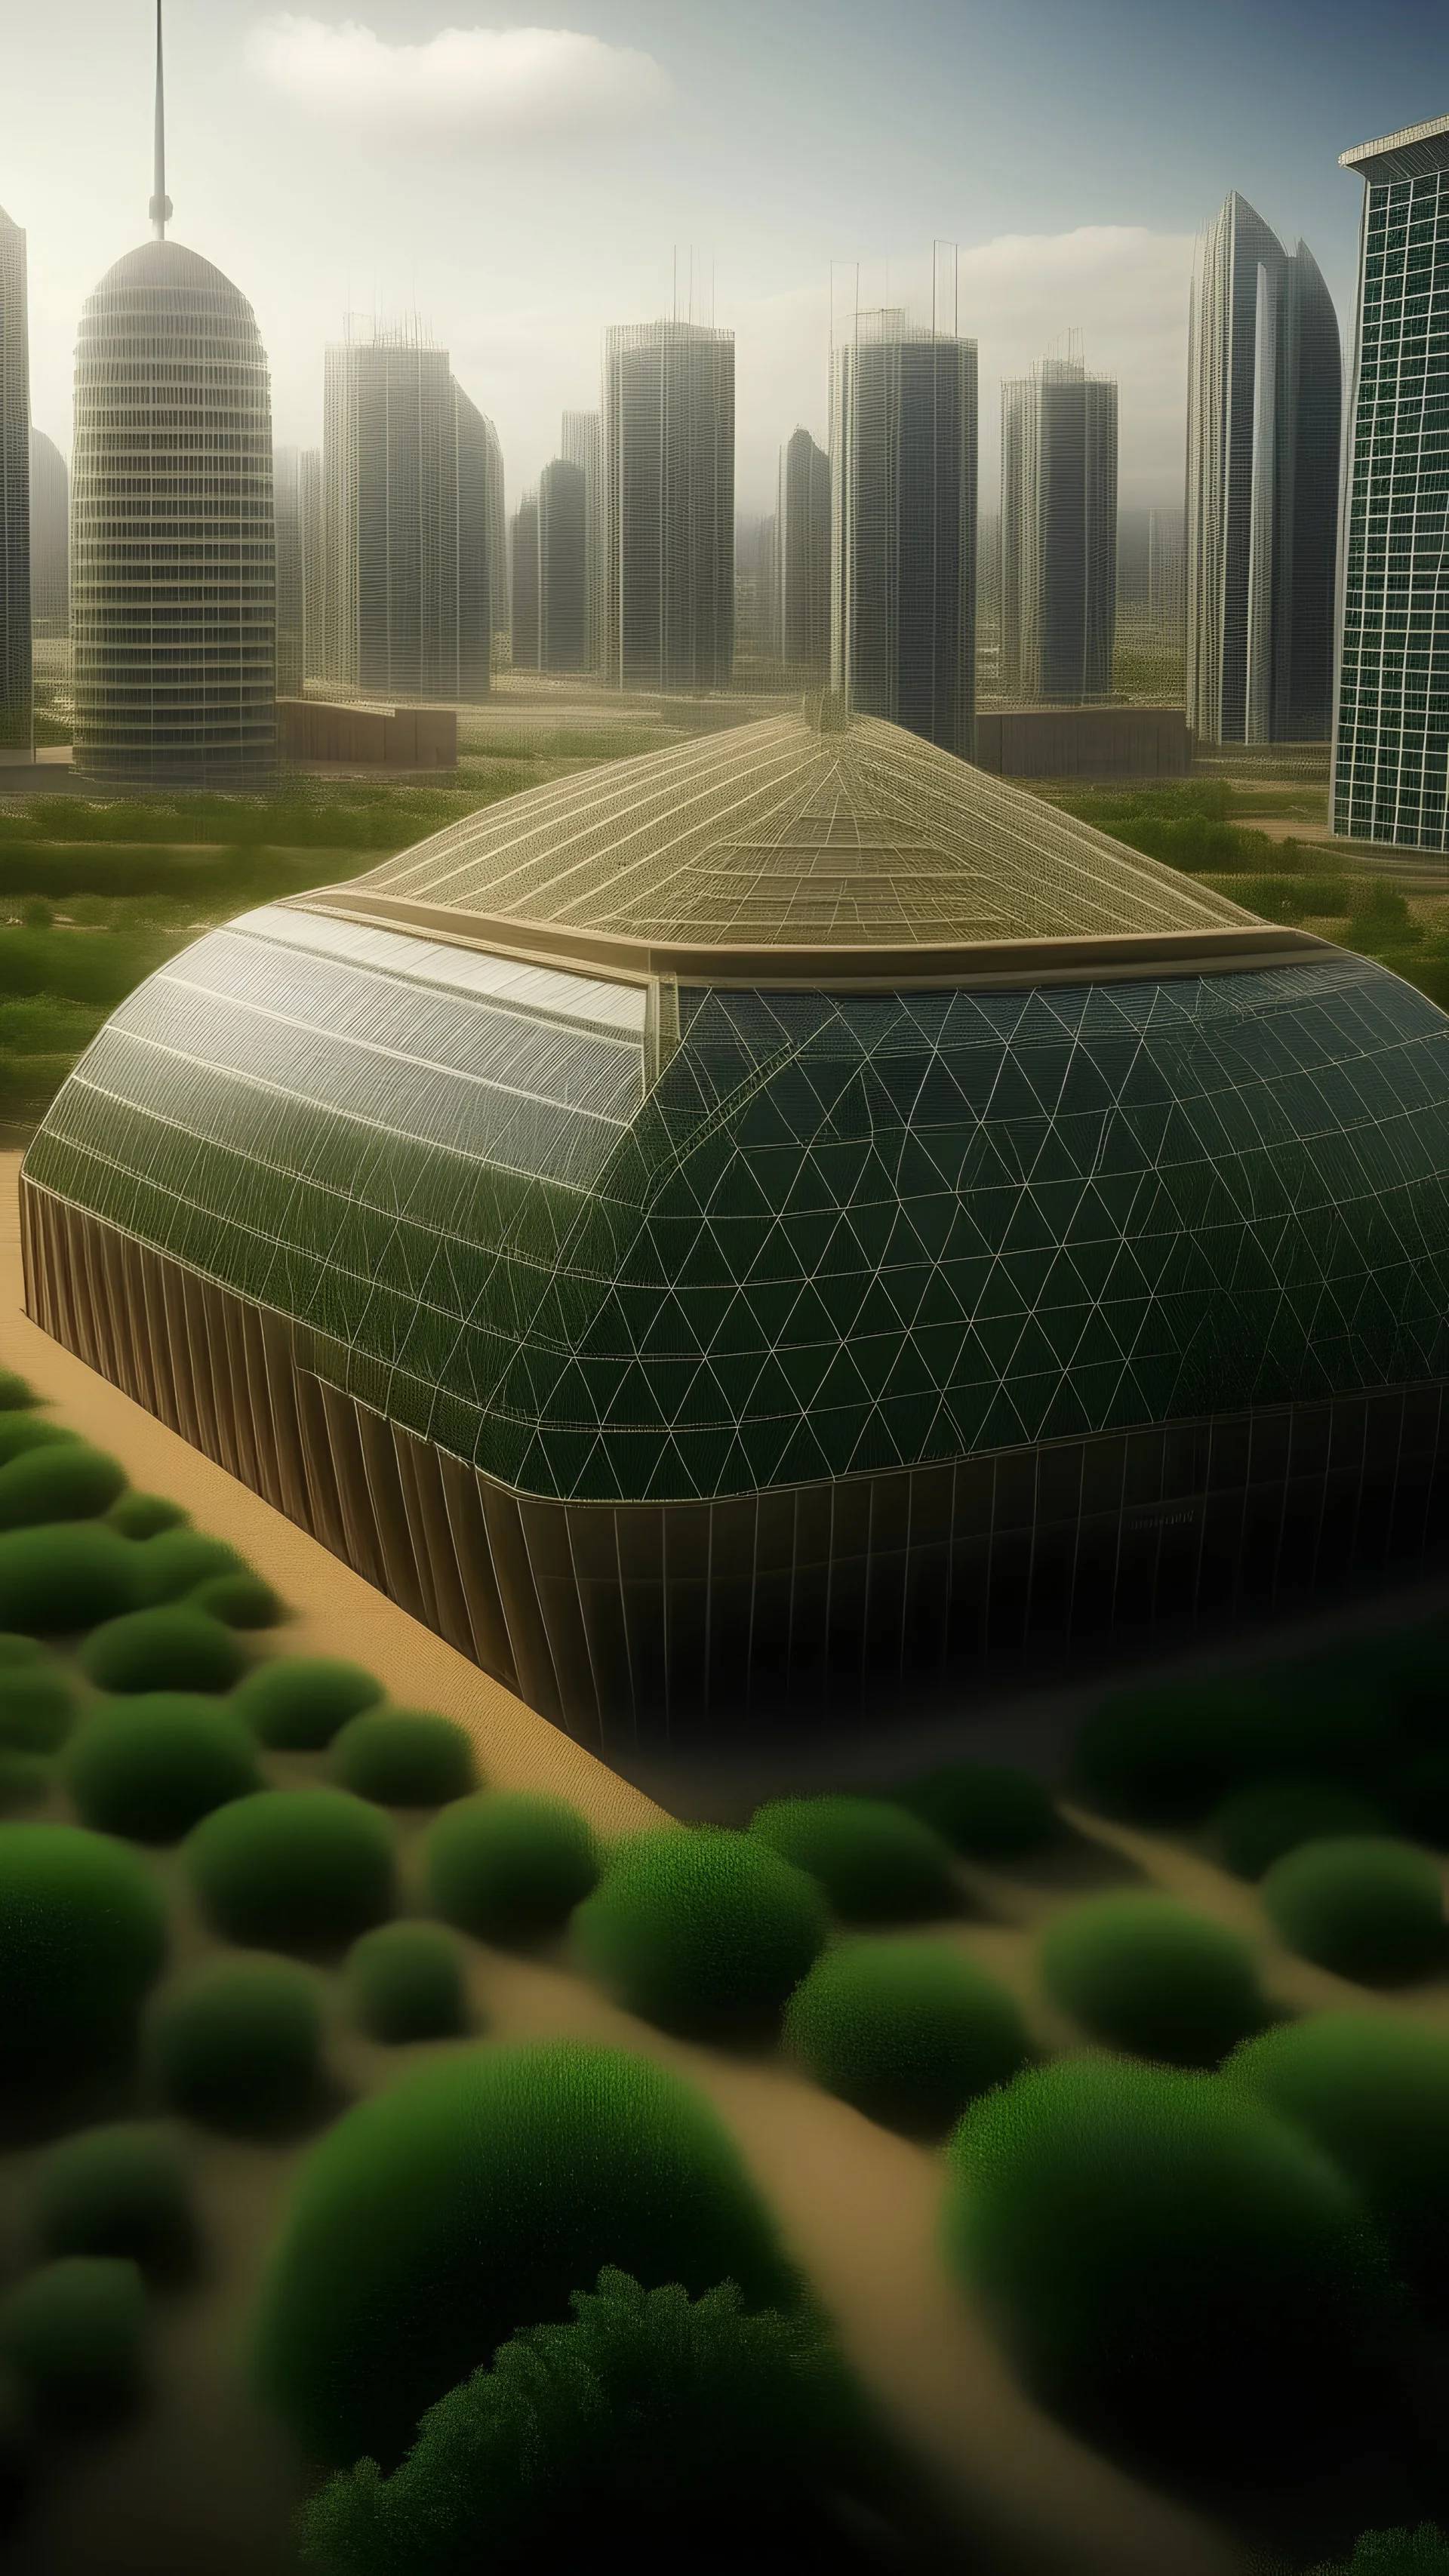 A massive greenhouse with a futuristic city inside it and surrounded by sand.